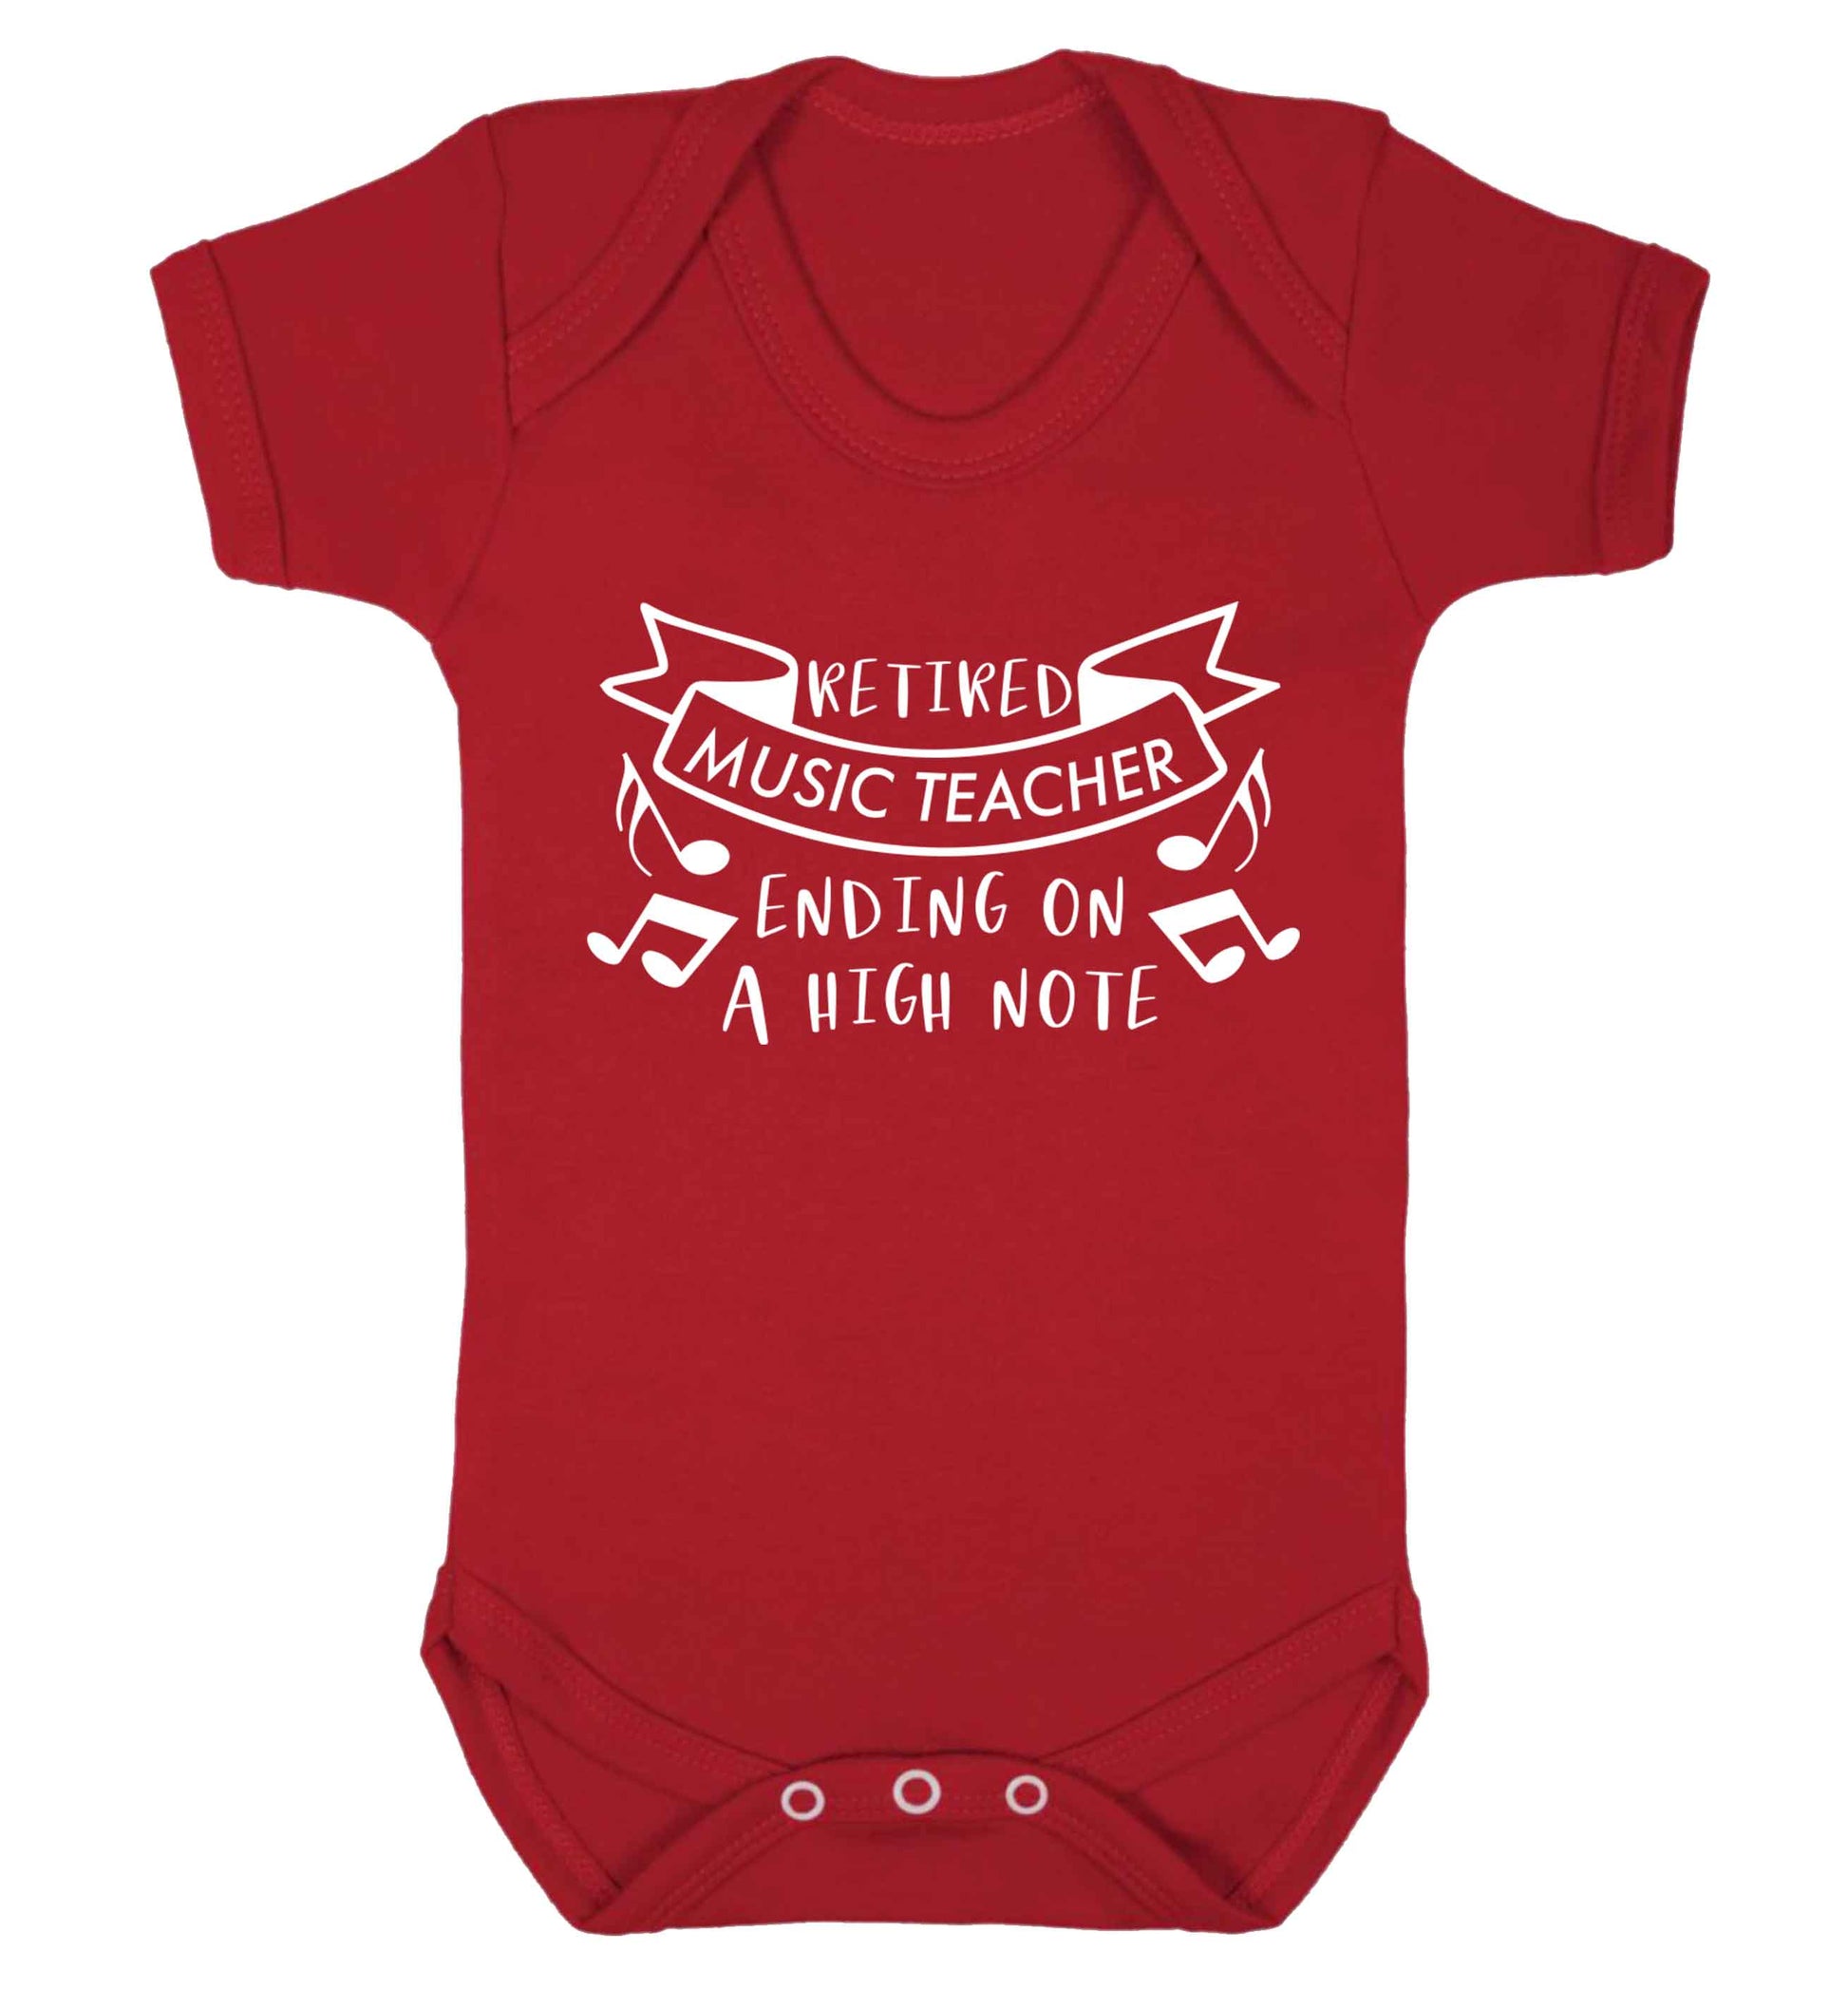 Retired music teacher ending on a high note Baby Vest red 18-24 months